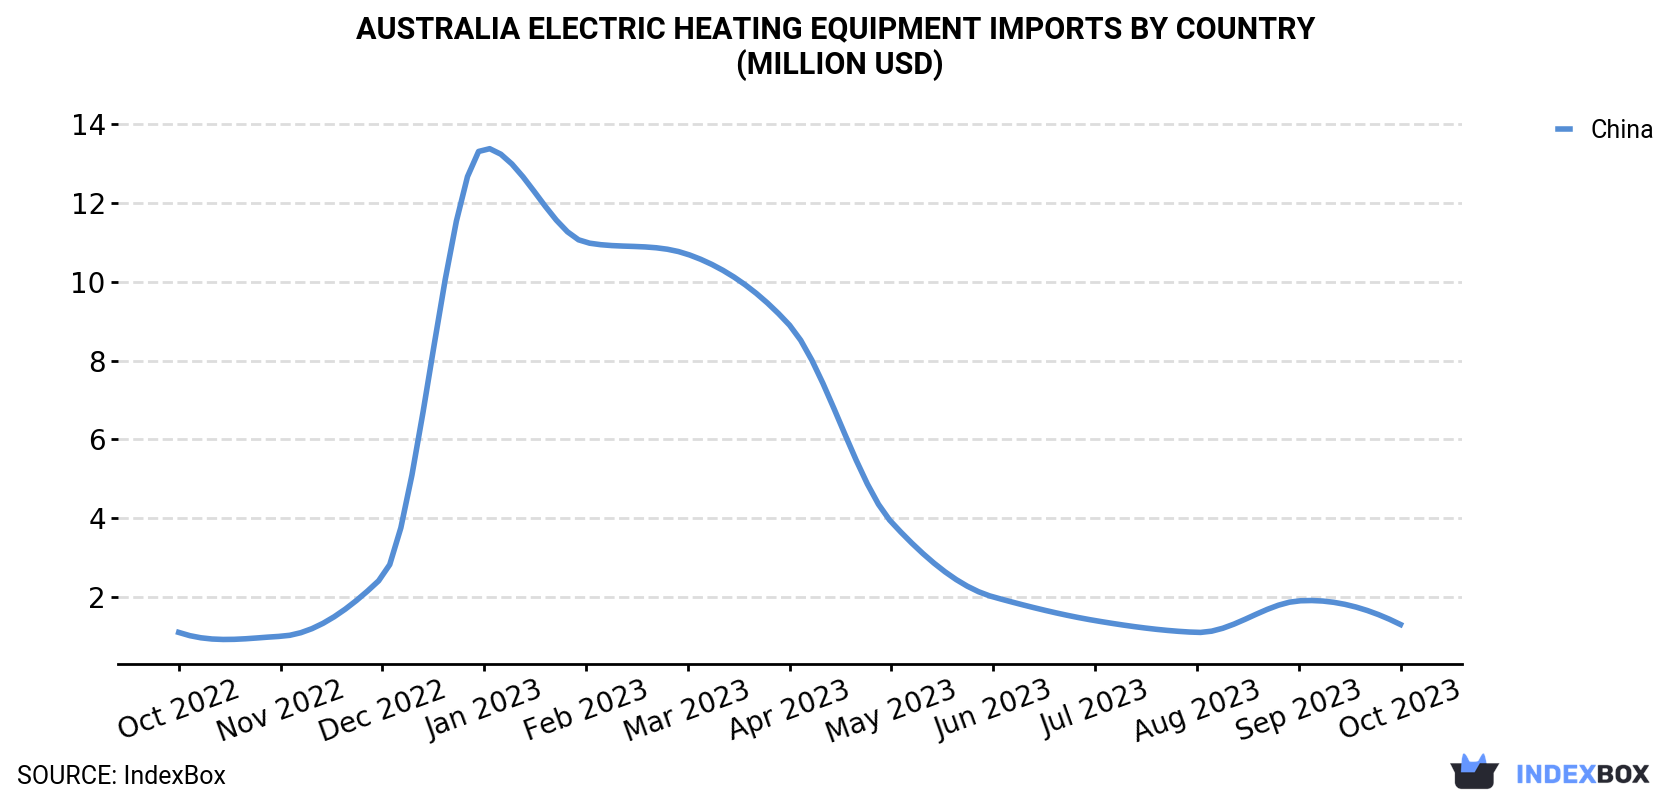 Australia Electric Heating Equipment Imports By Country (Million USD)